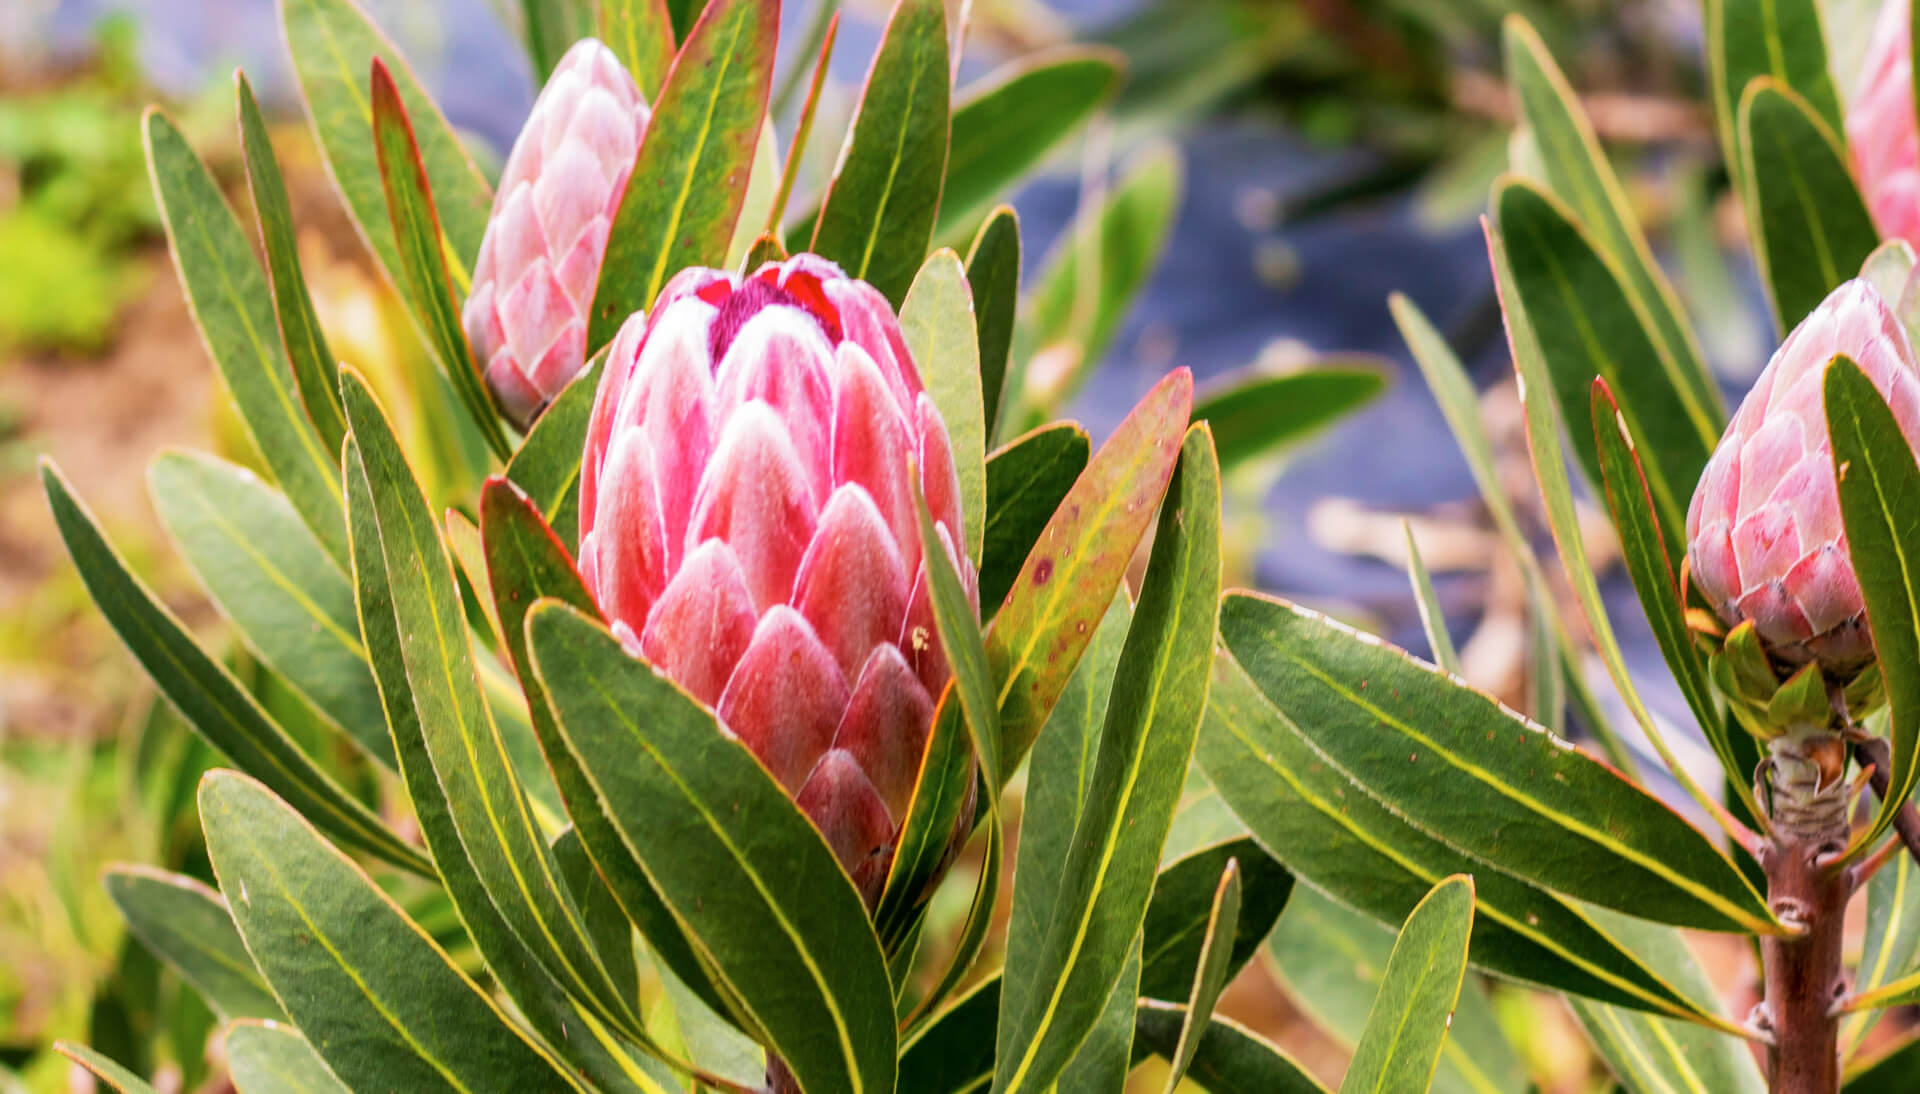 The symbolism and beauty of Protea Pink Ice at graduations